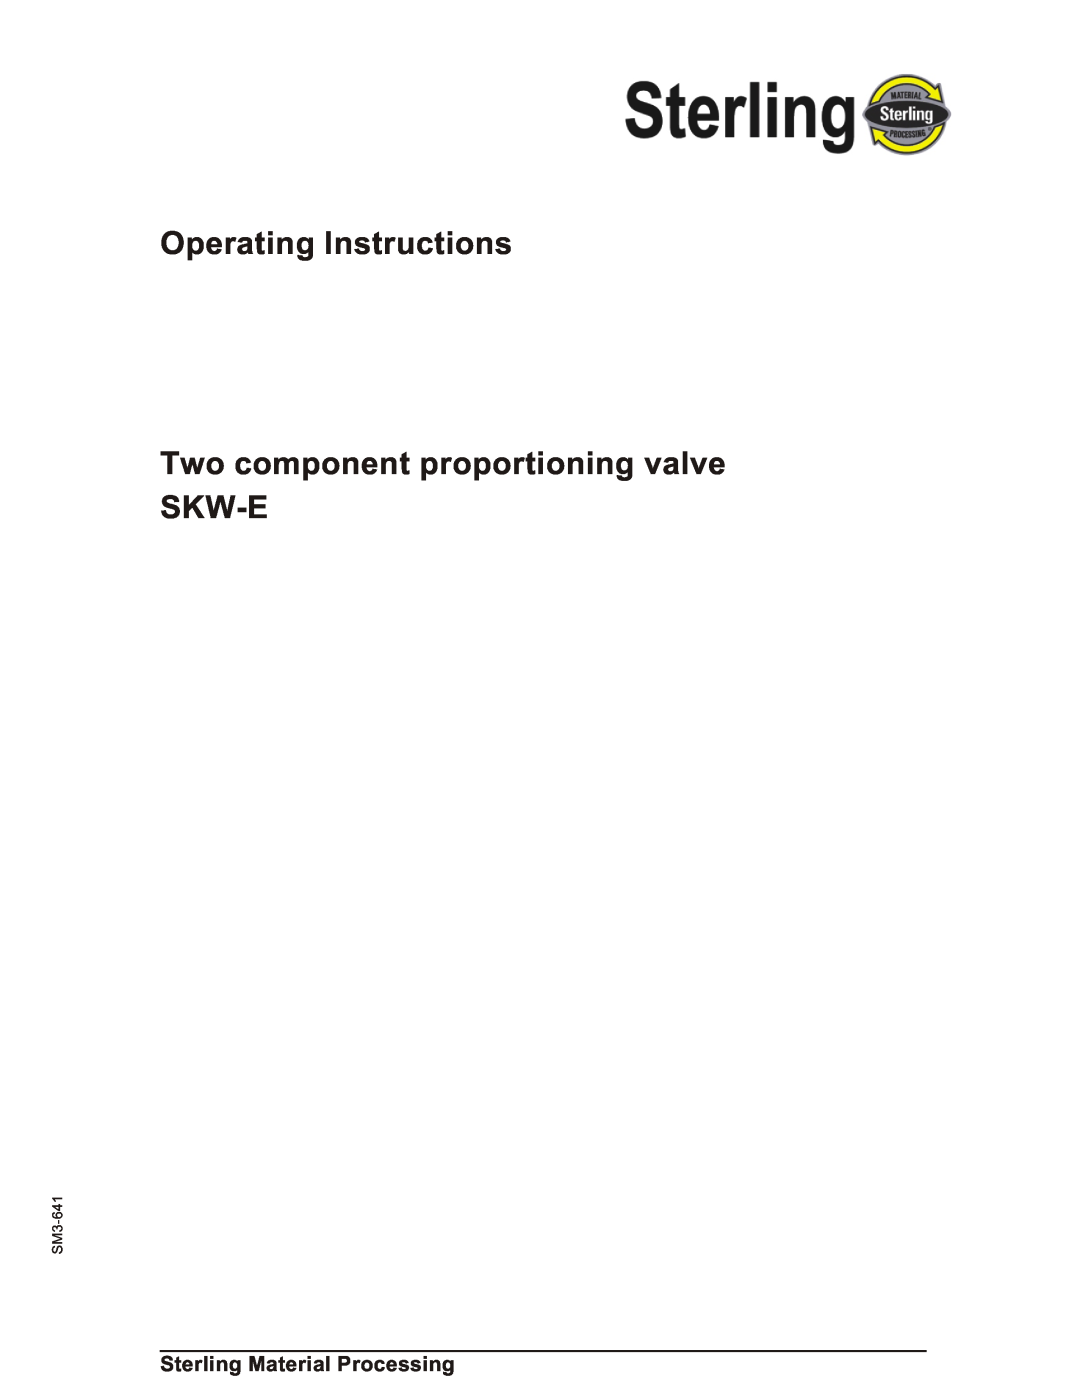 Sterling Plumbing SKW-E manual Sterling Material Processing, Operating Instructions, SM3-641 